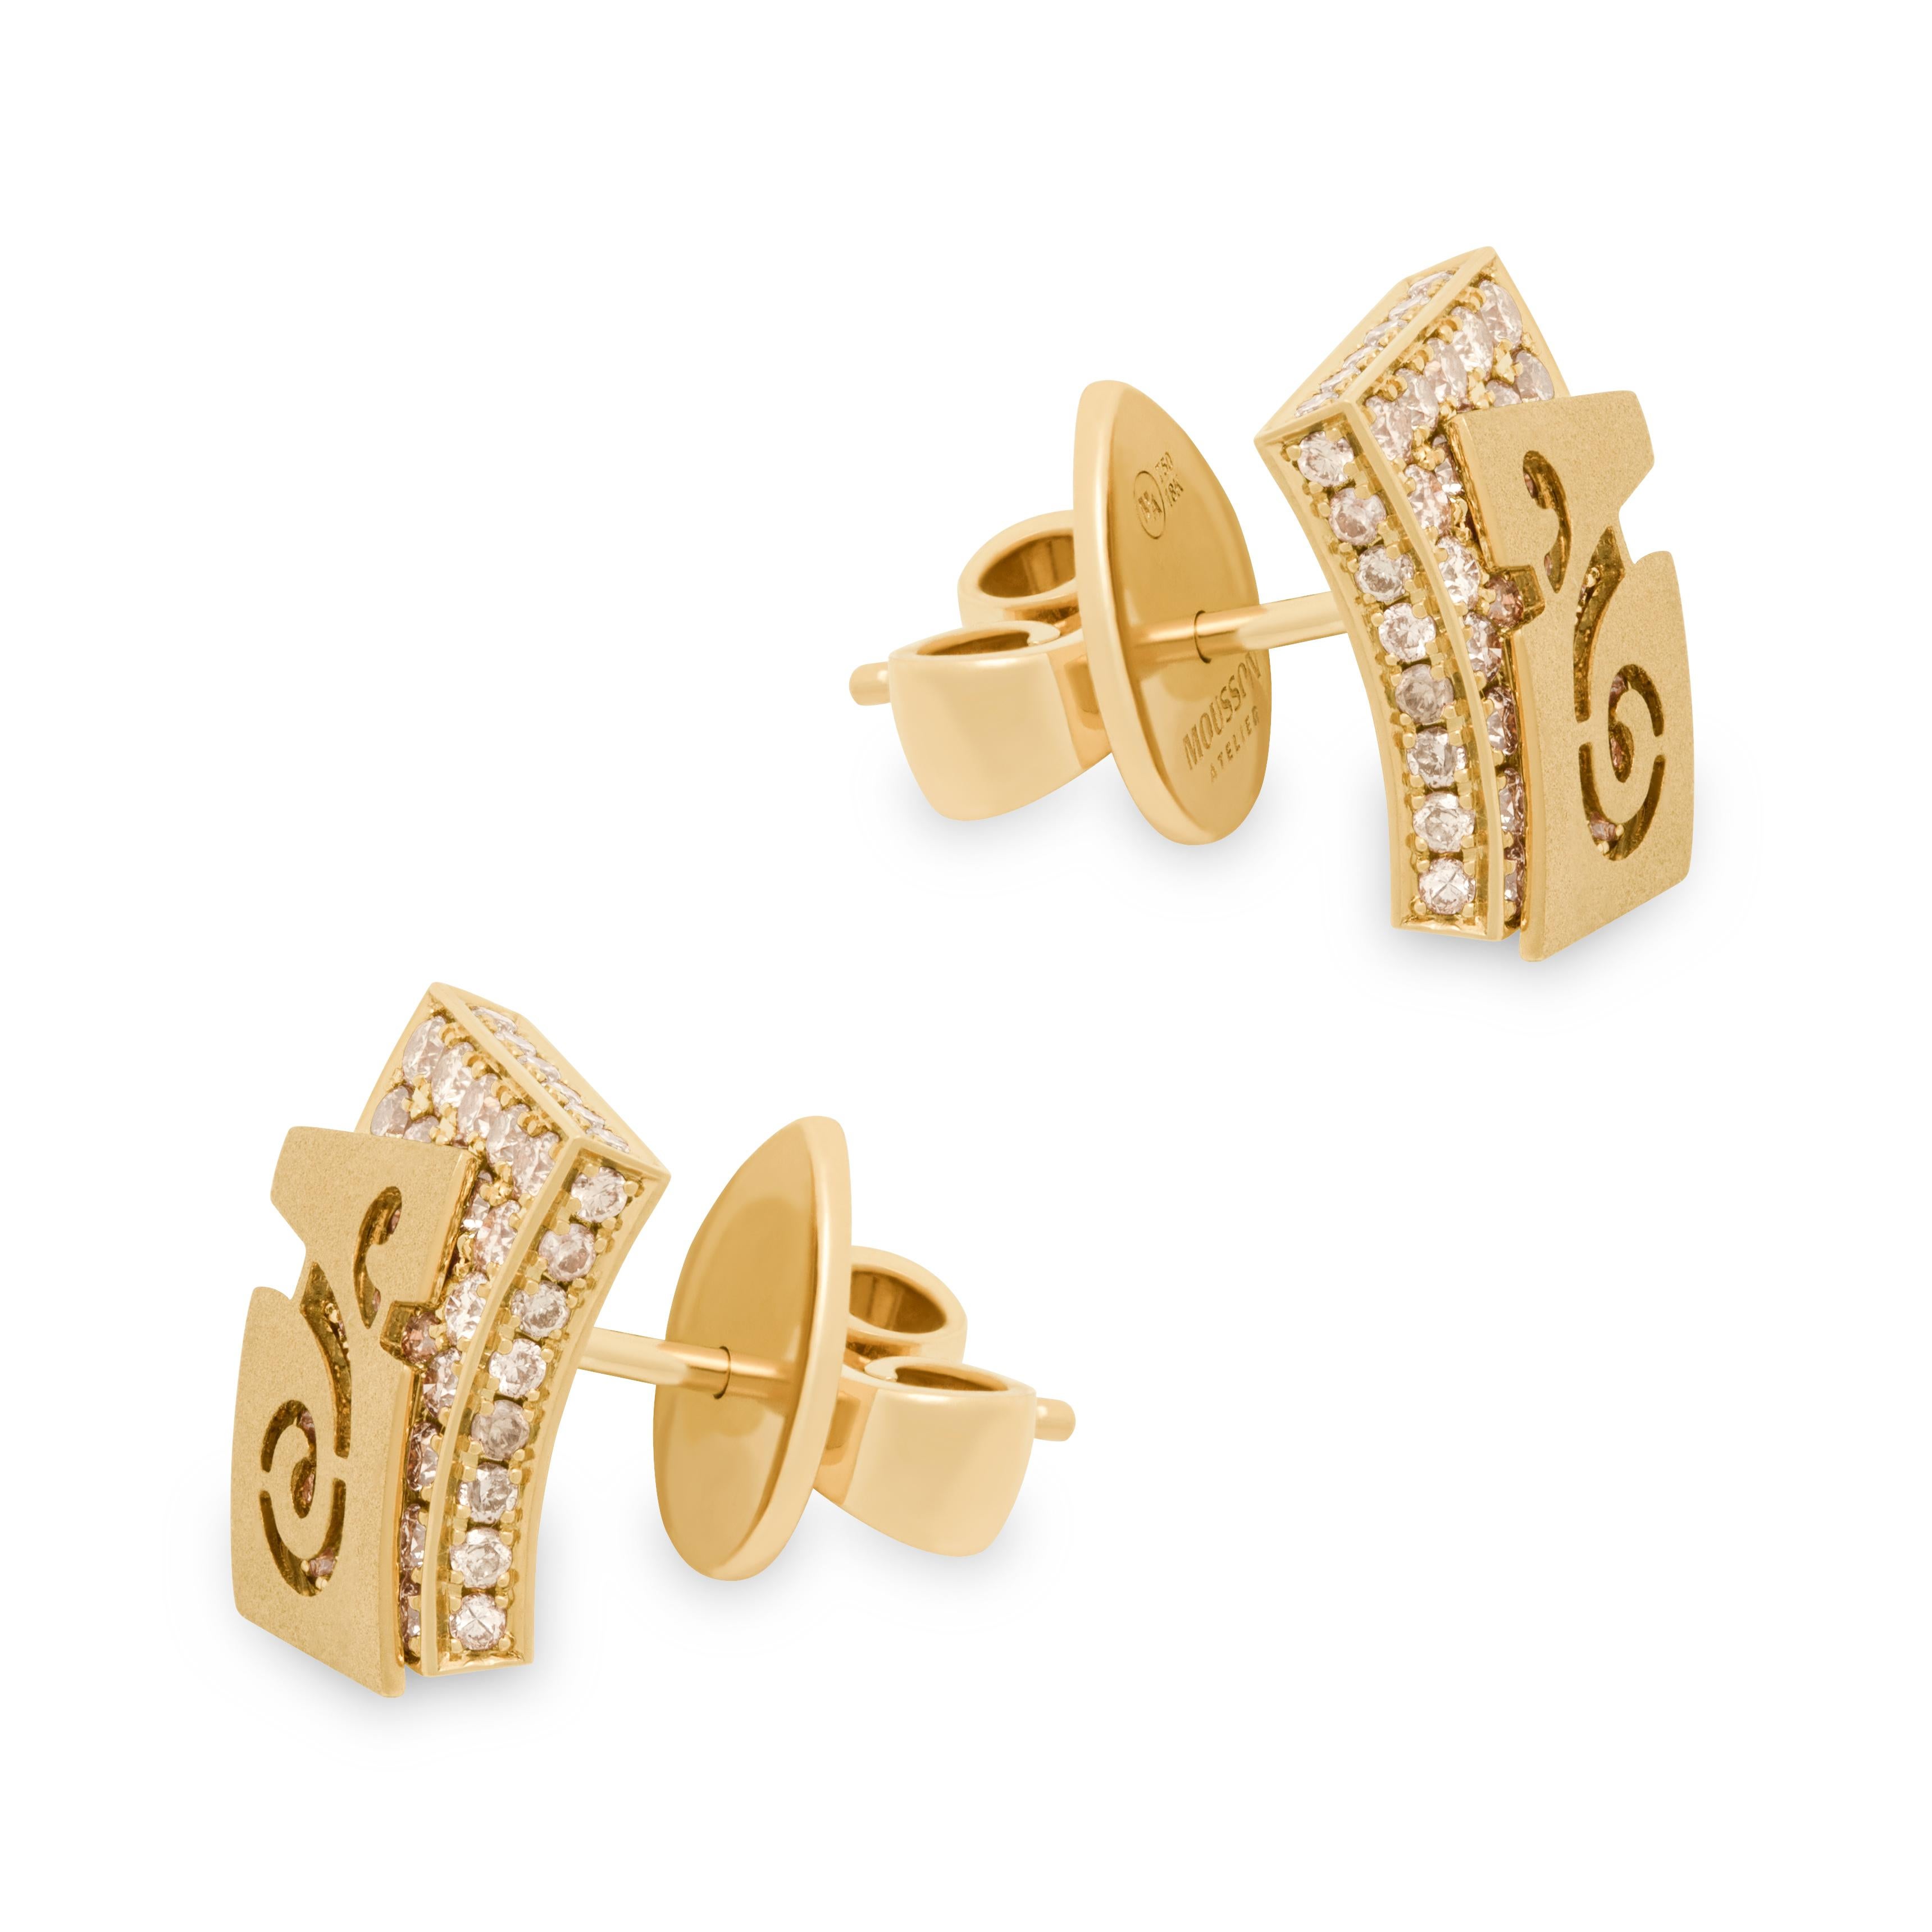 Champagne Diamonds 18 Karat Yellow Gold Studs Veil Earrings
Veil inspired this jewelry series by our designers. For example, these Earrings seem to have two layers. The first layer is a 